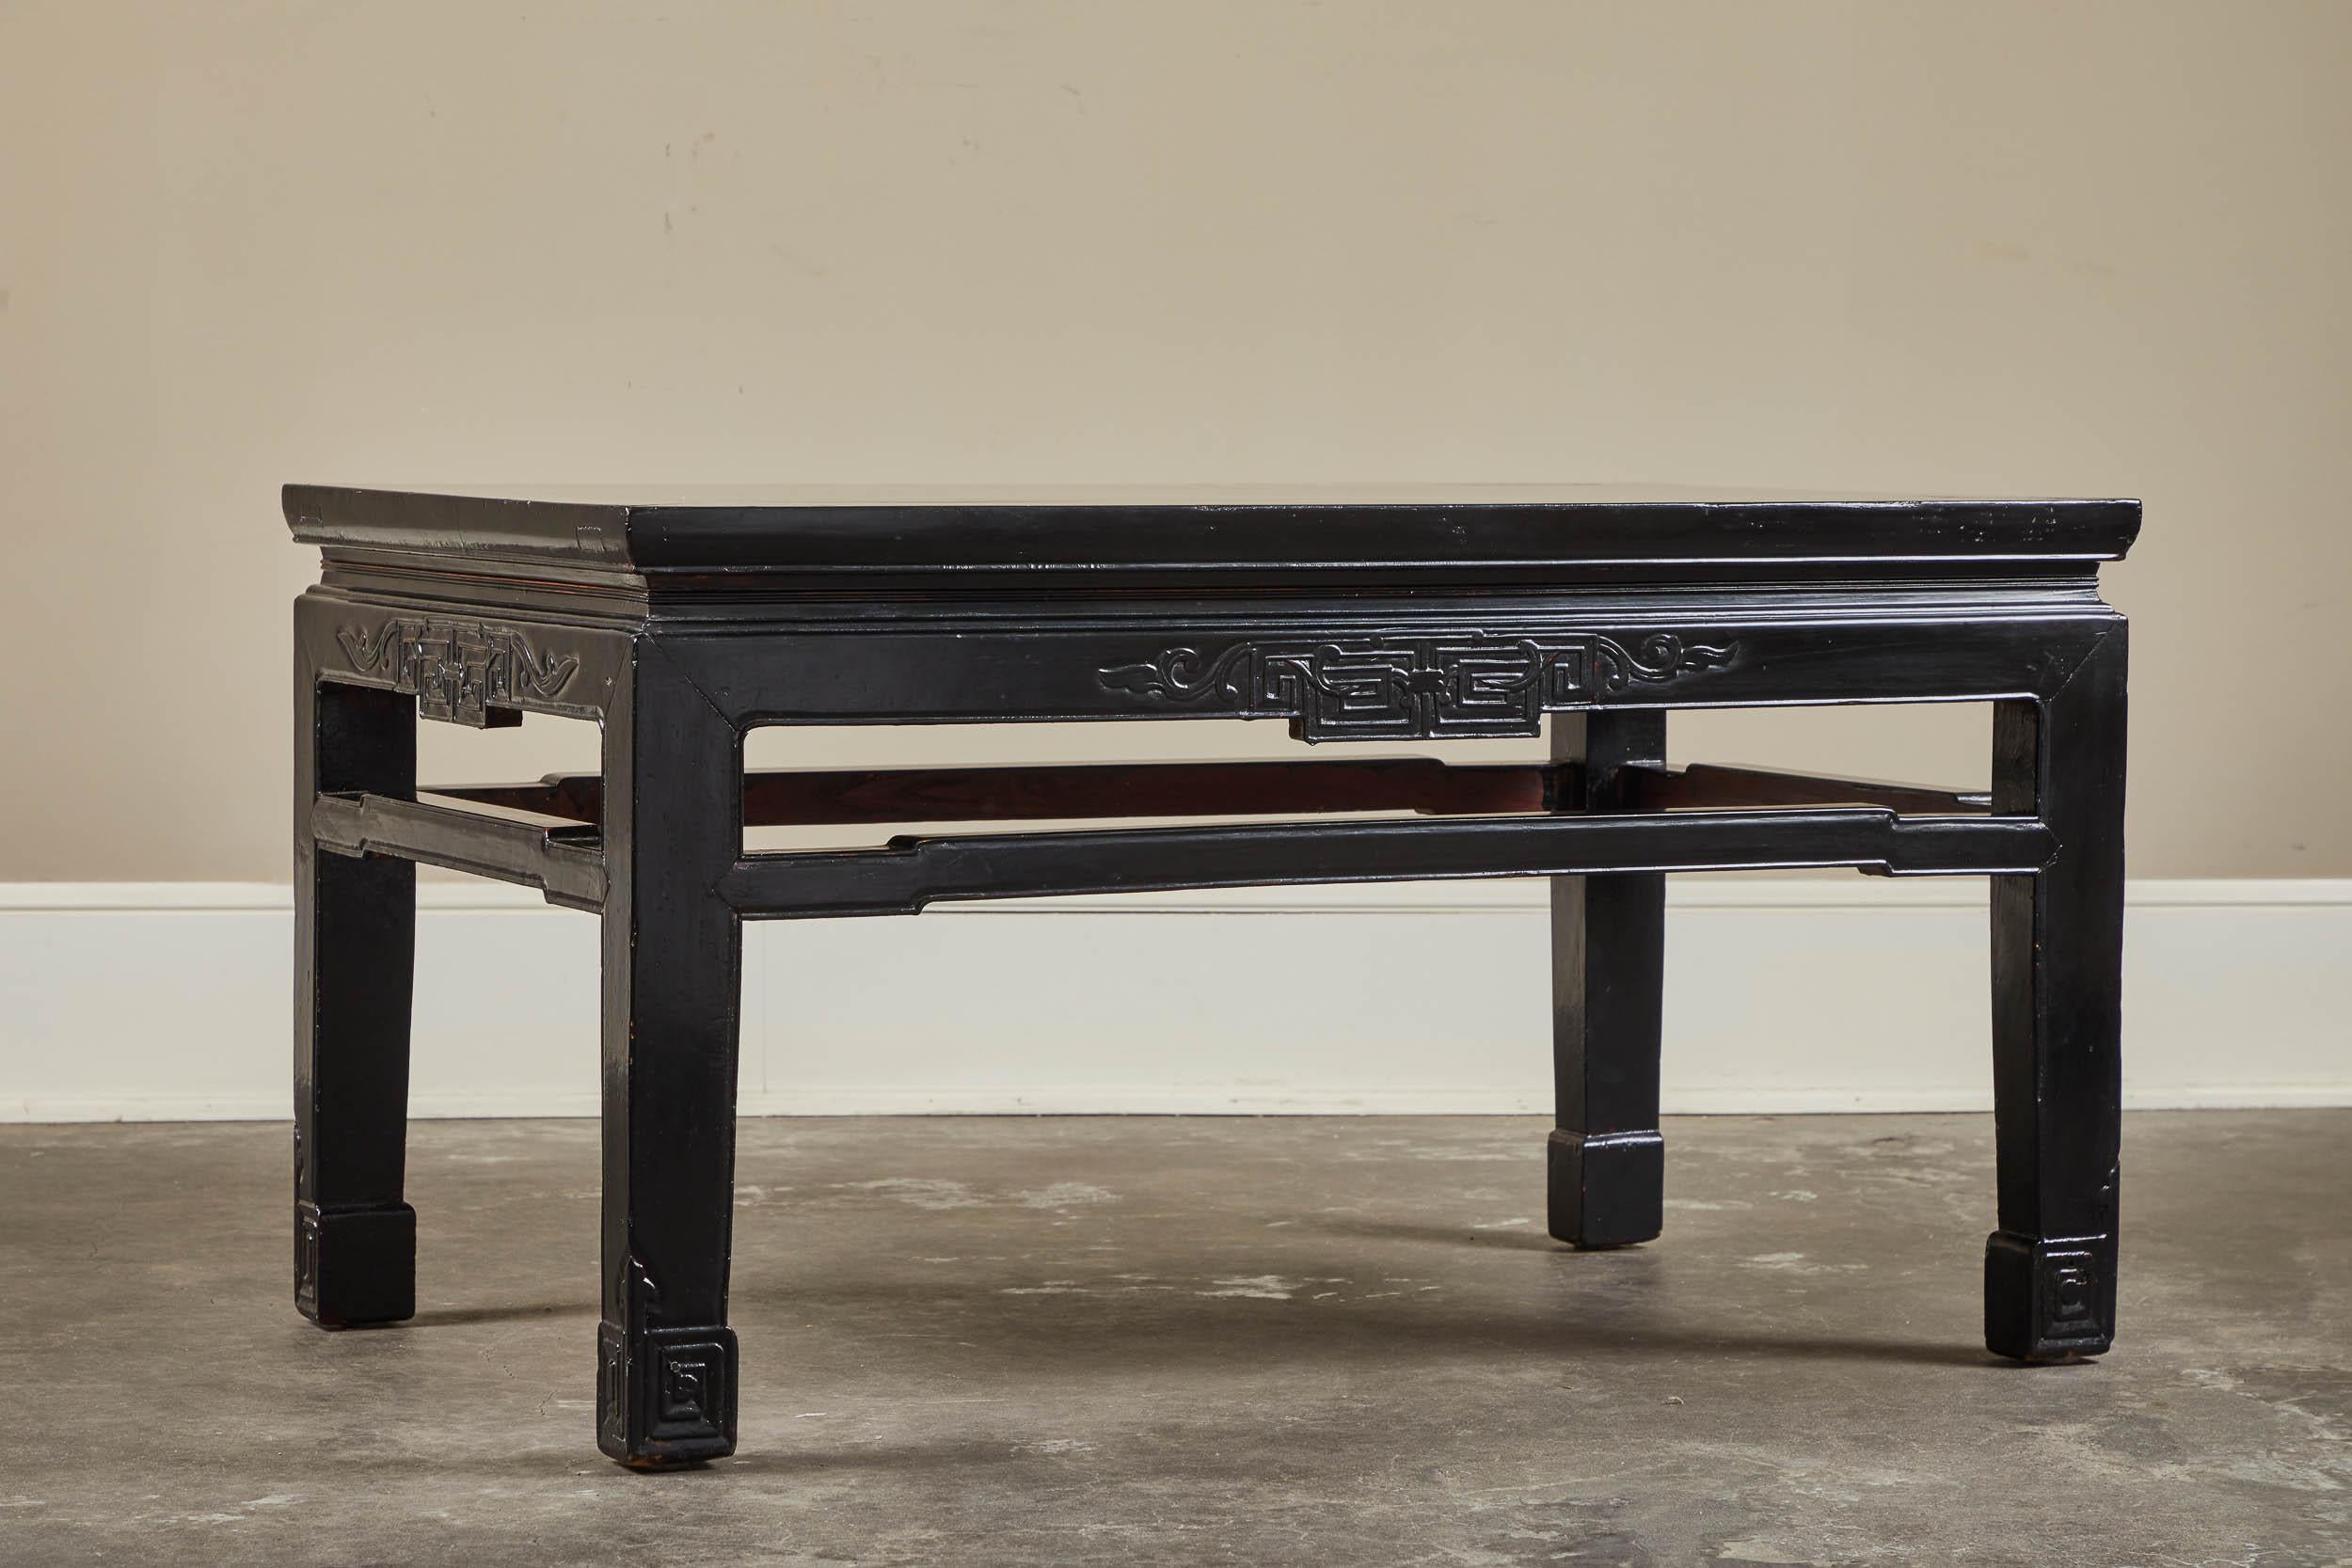 An 18th century low black lacquer kang table from Shanxi, China. Unusual in size.